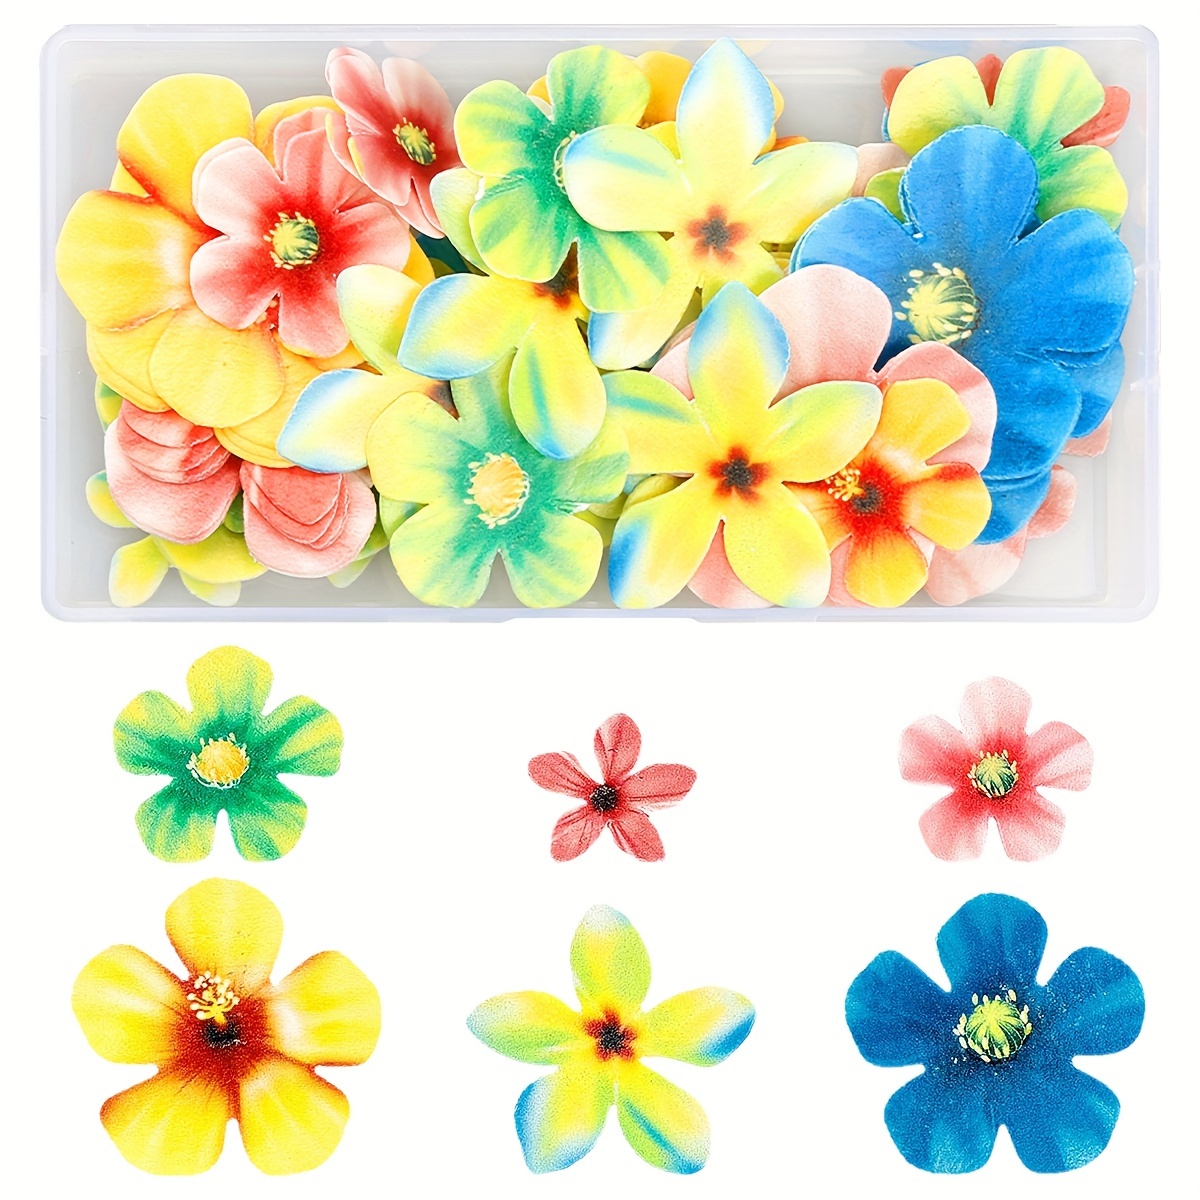 Cake Wafer Flowers Decorations Edible, Edible Cupcake Decorations (72pcs)